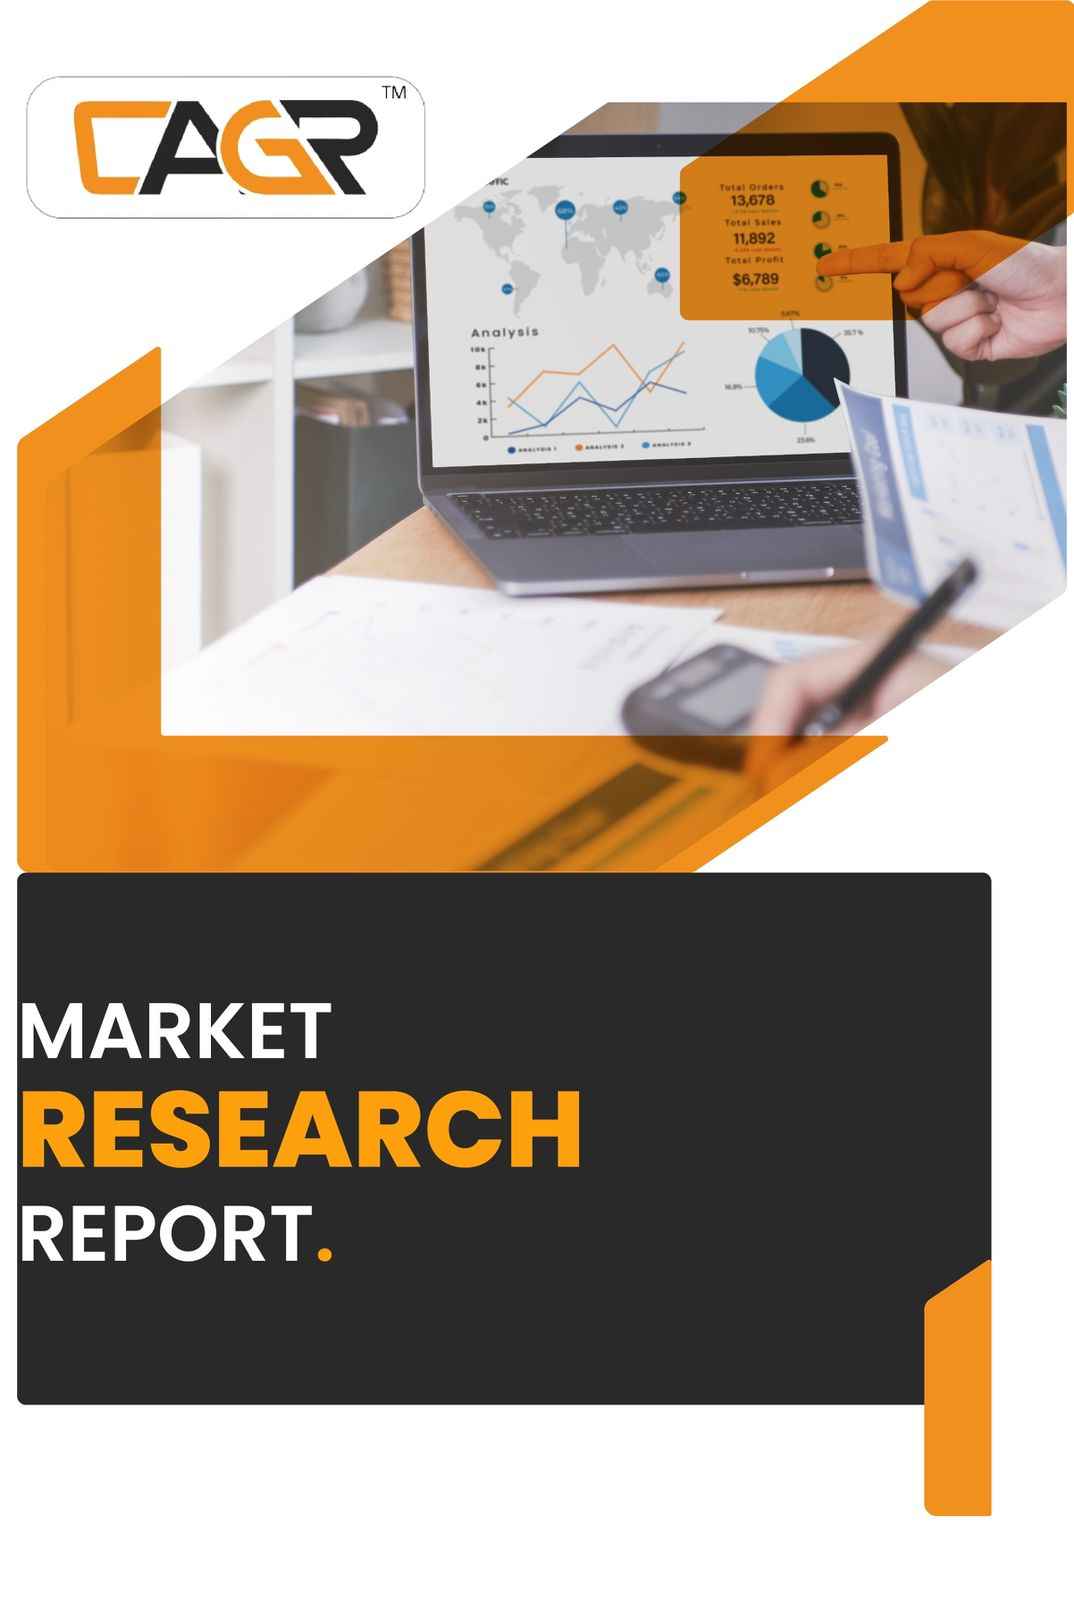 Global Aerospace Industry Injection Molding Machines Market Status, Trends and COVID-19 Impact Report 2022